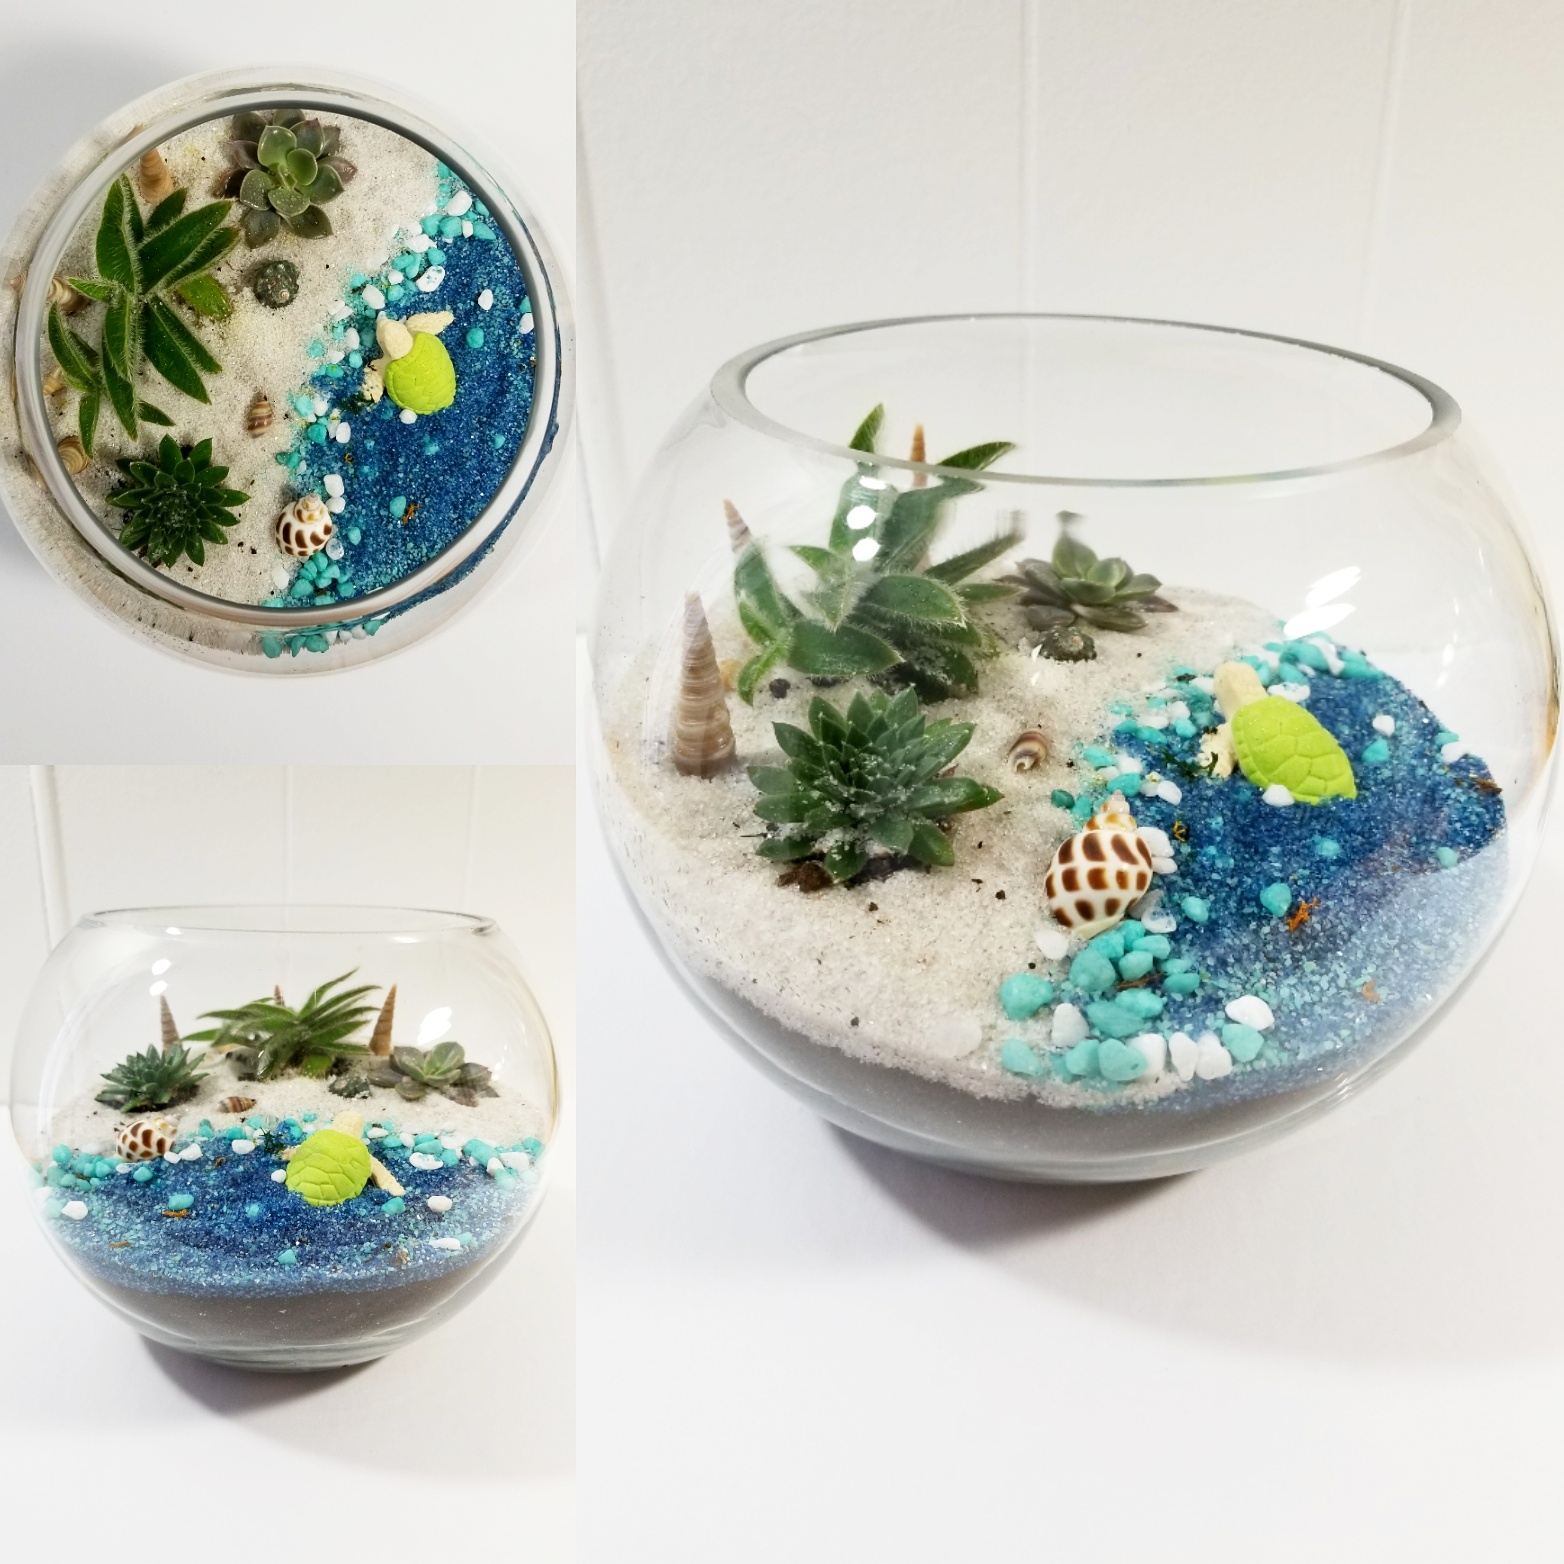 A Sea Shore with Sea Creature Rose Bowl Terrarium plant nite project by Yaymaker